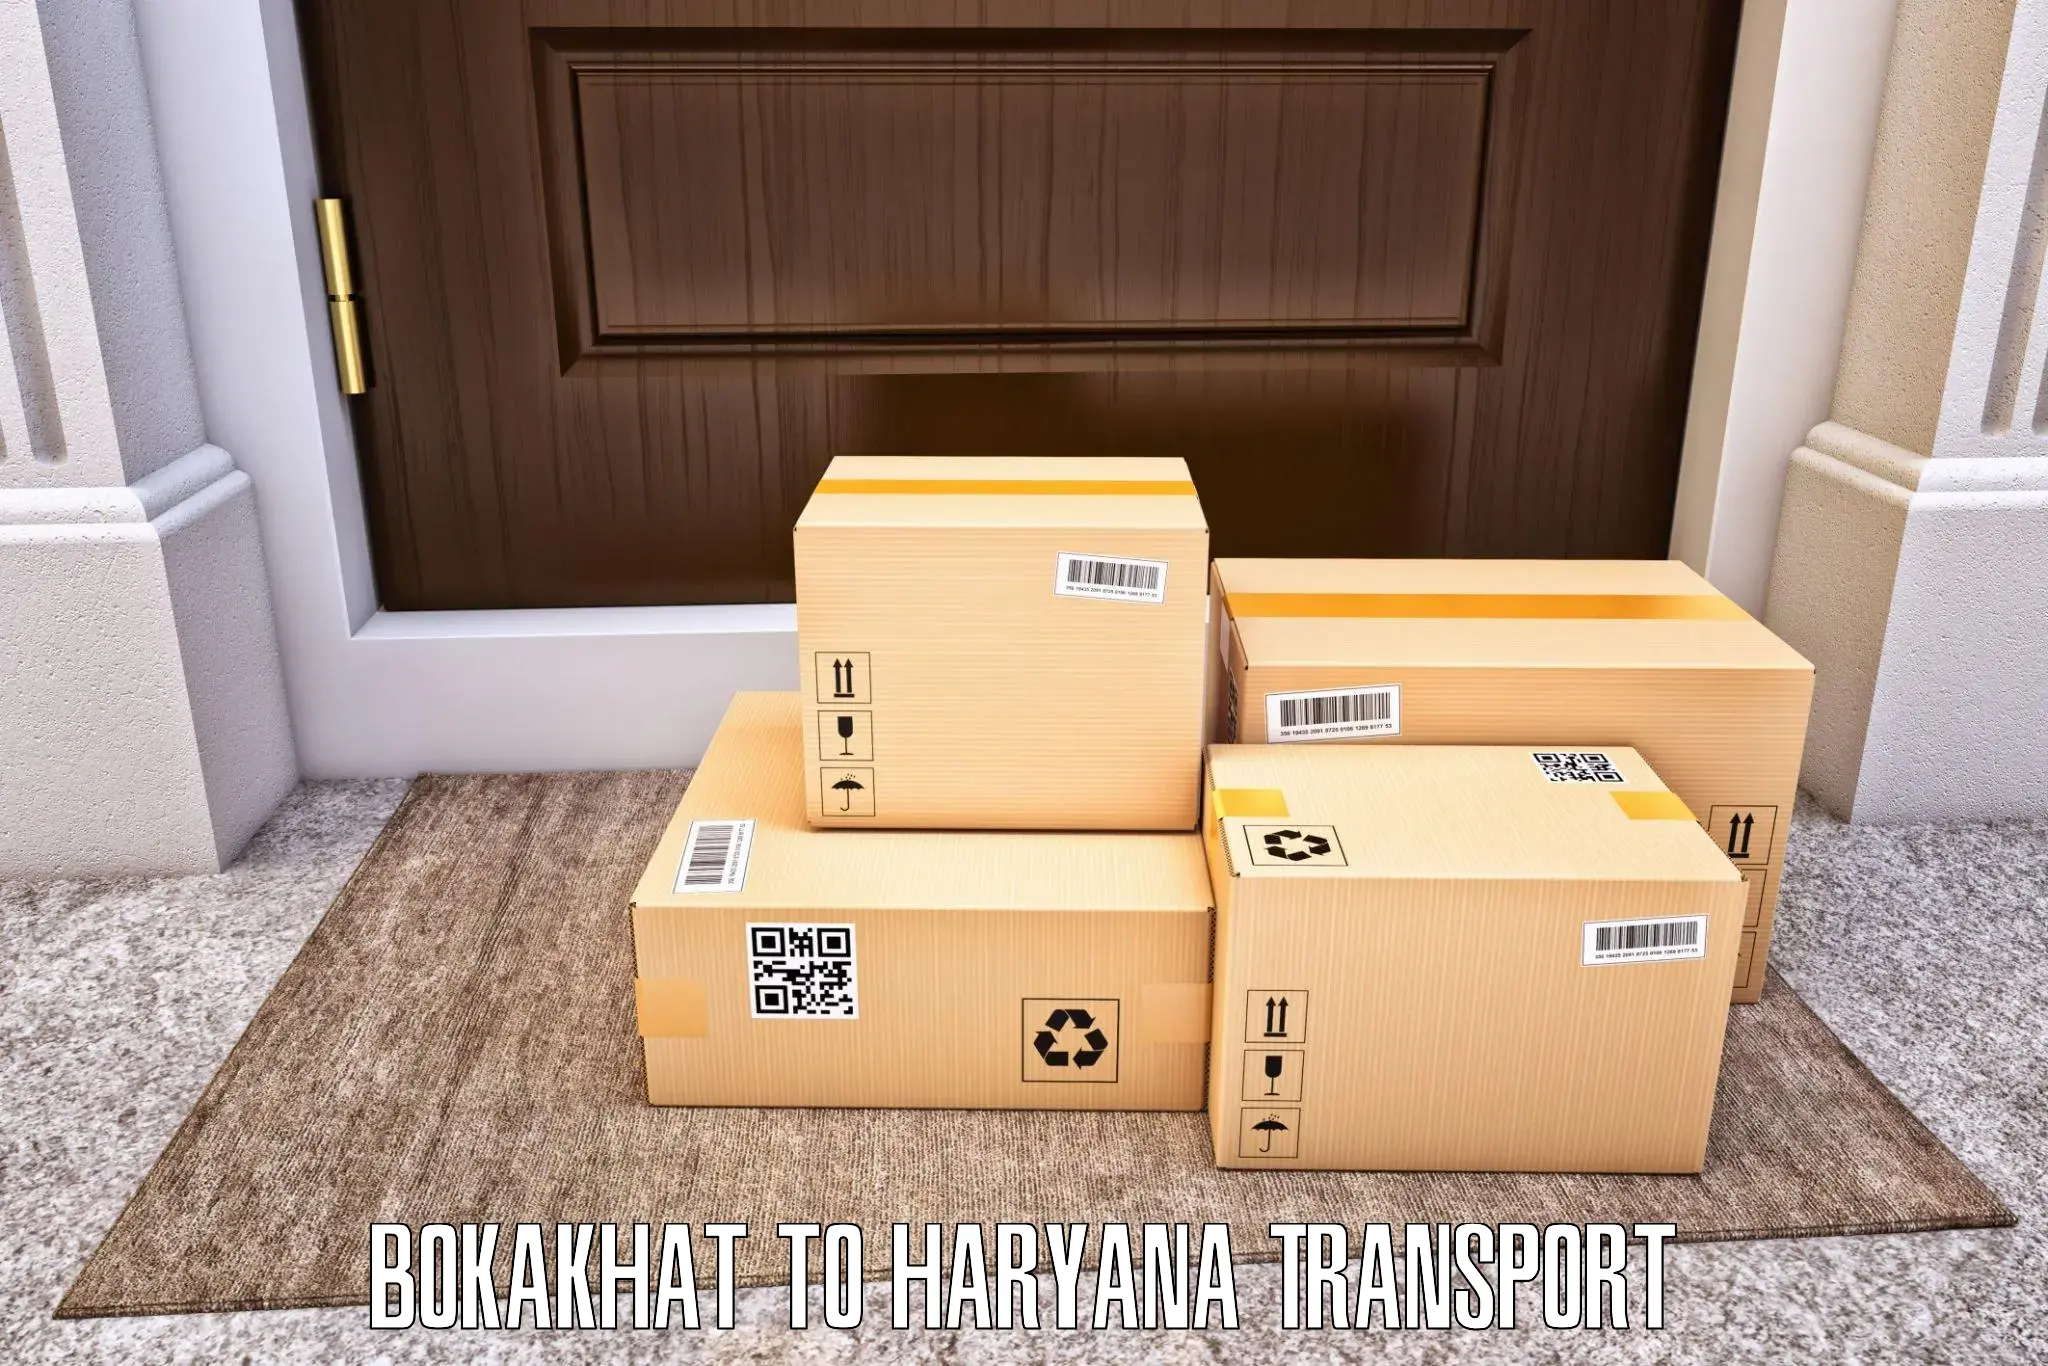 Goods transport services Bokakhat to Sonipat